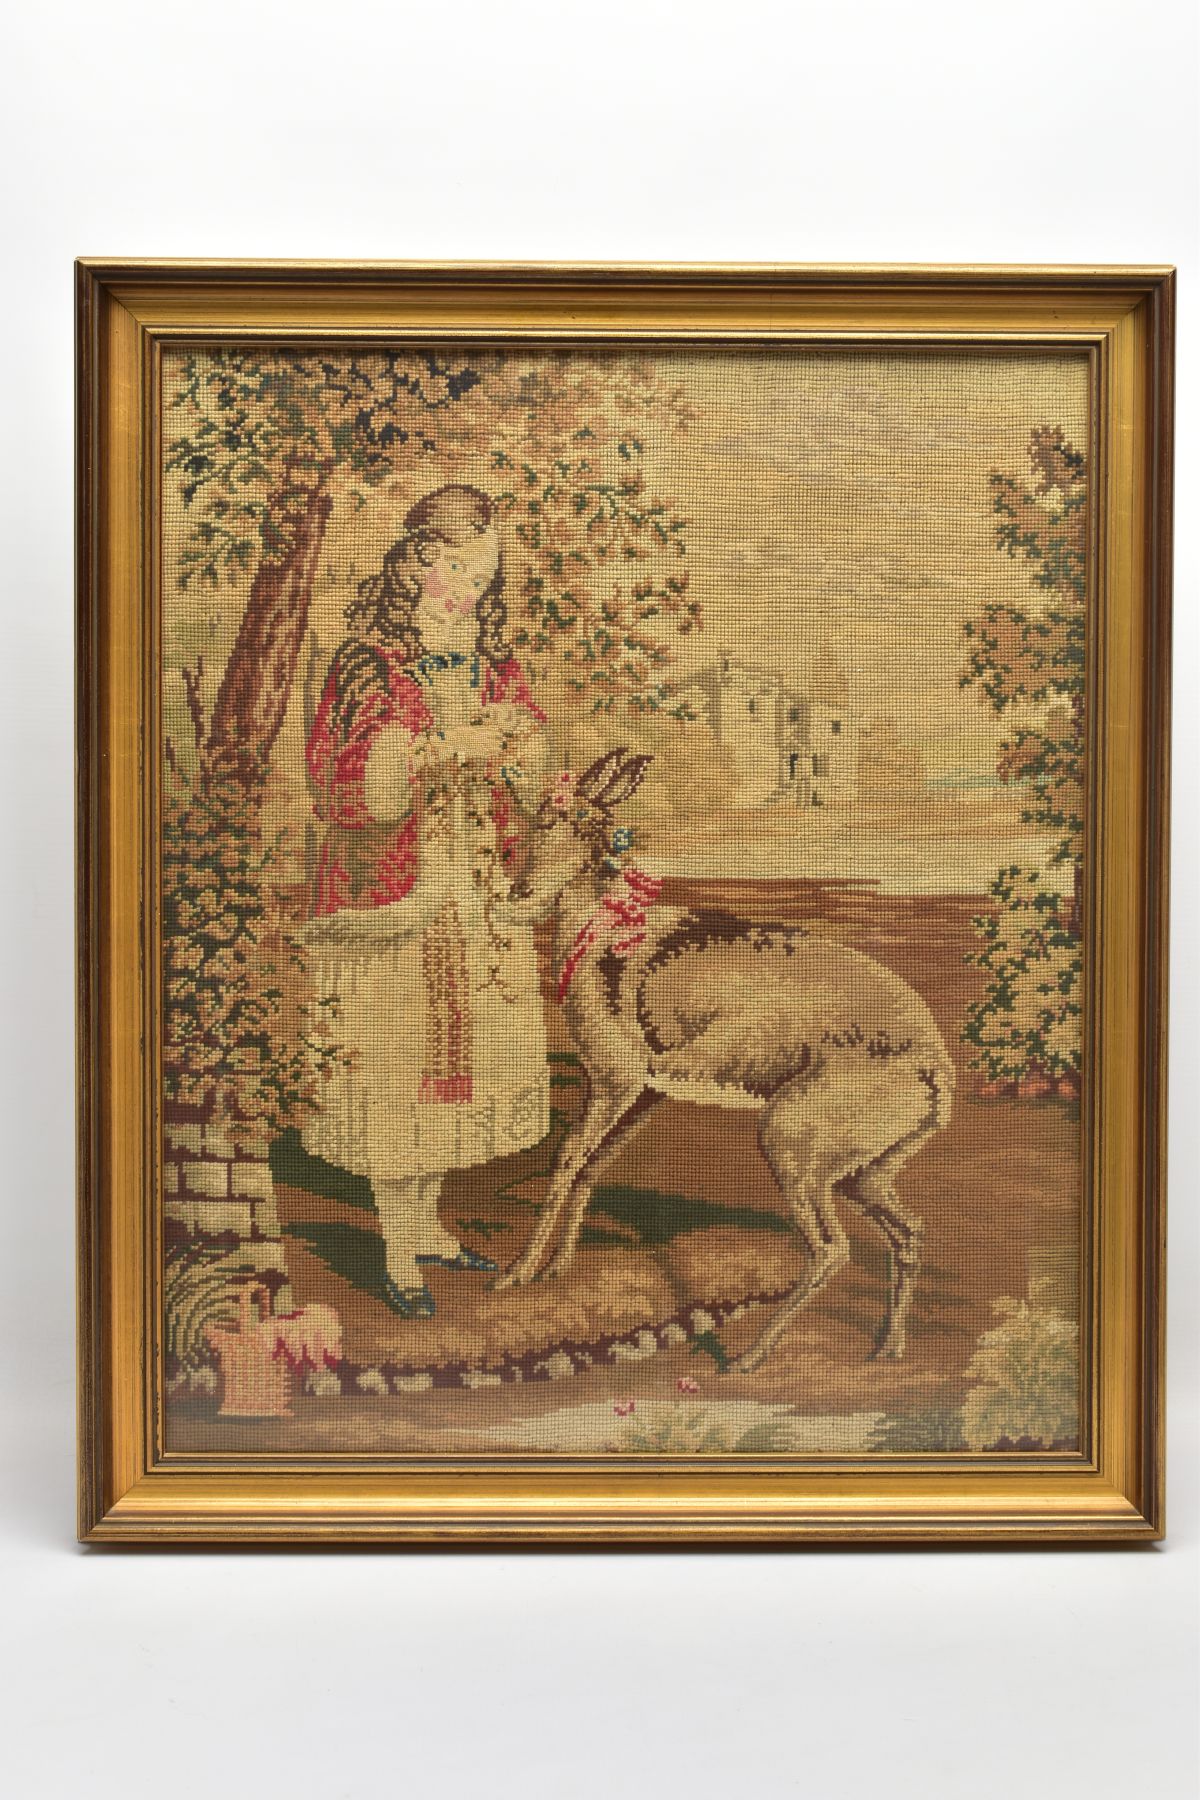 A VICTORIAN HAND SEWN TAPESTRY DEPICTING A YOUNG FEMALE FIGURE PUTTING FLOWER GARLANDS ONTO A